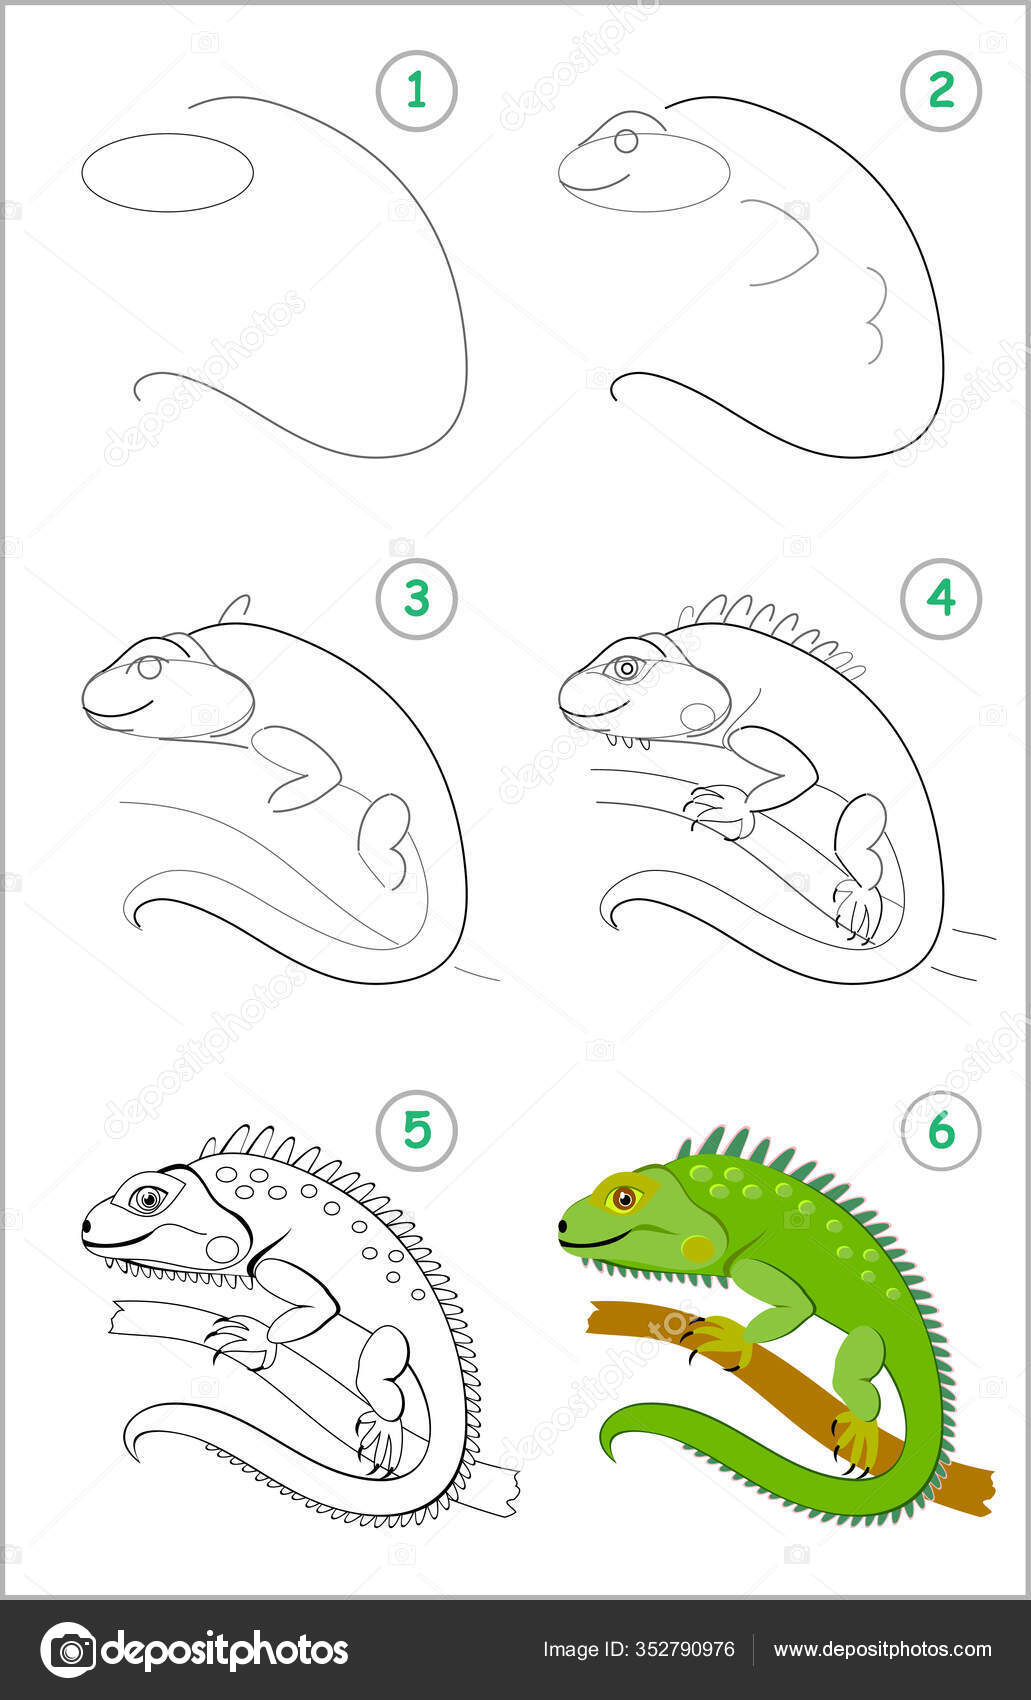 How draw step step cute green iguana educational page kids stock vector by nataljacernecka